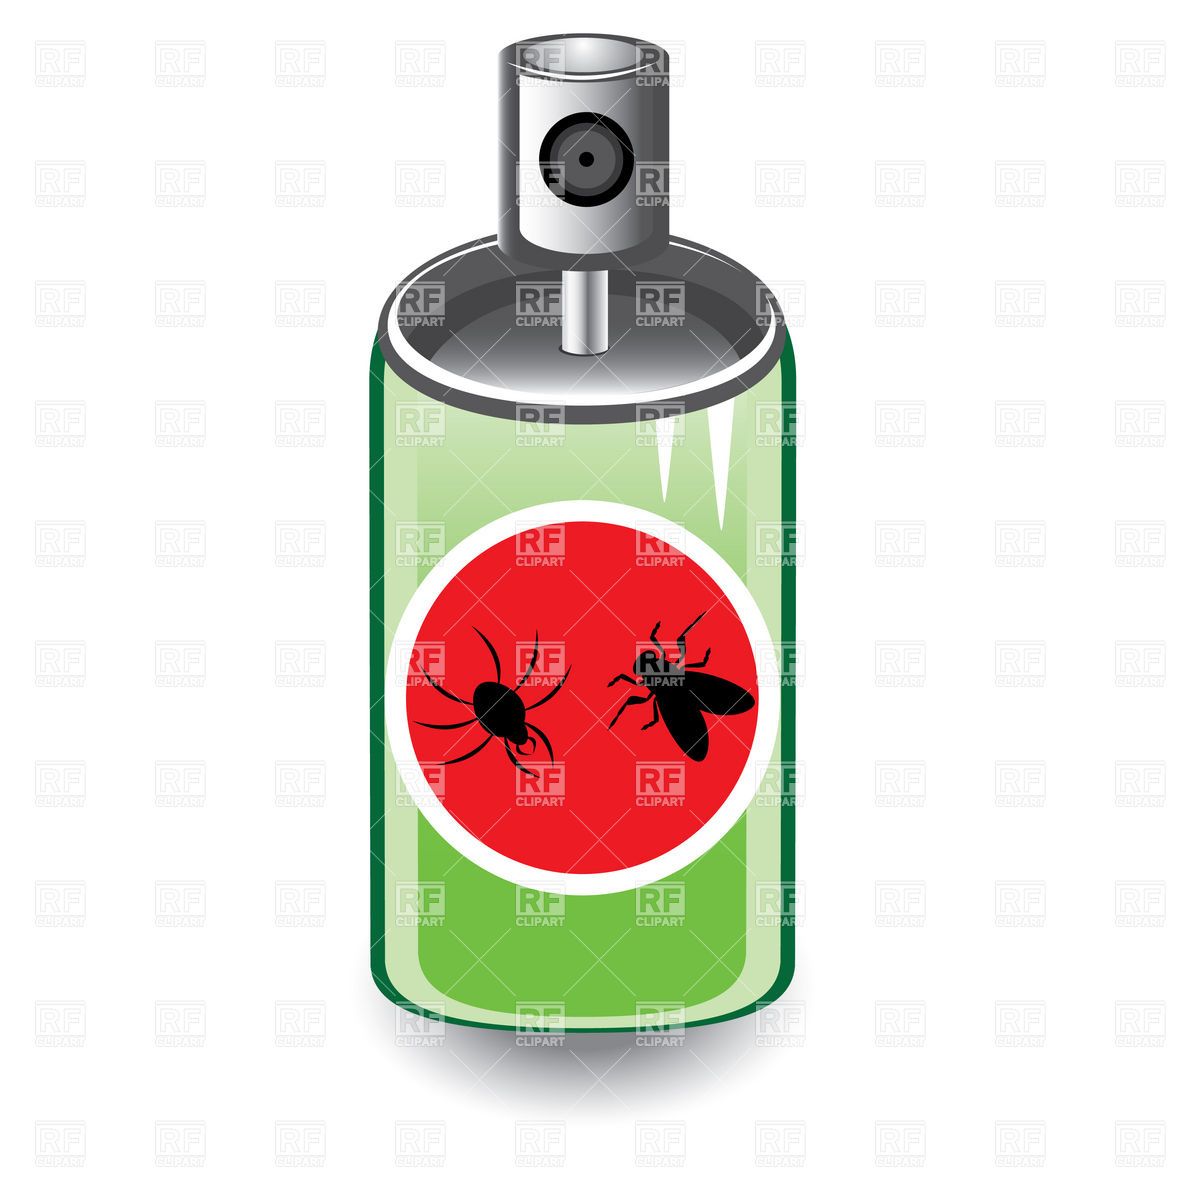     Bug Spray 7590 Objects Download Royalty Free Vector Clipart  Eps